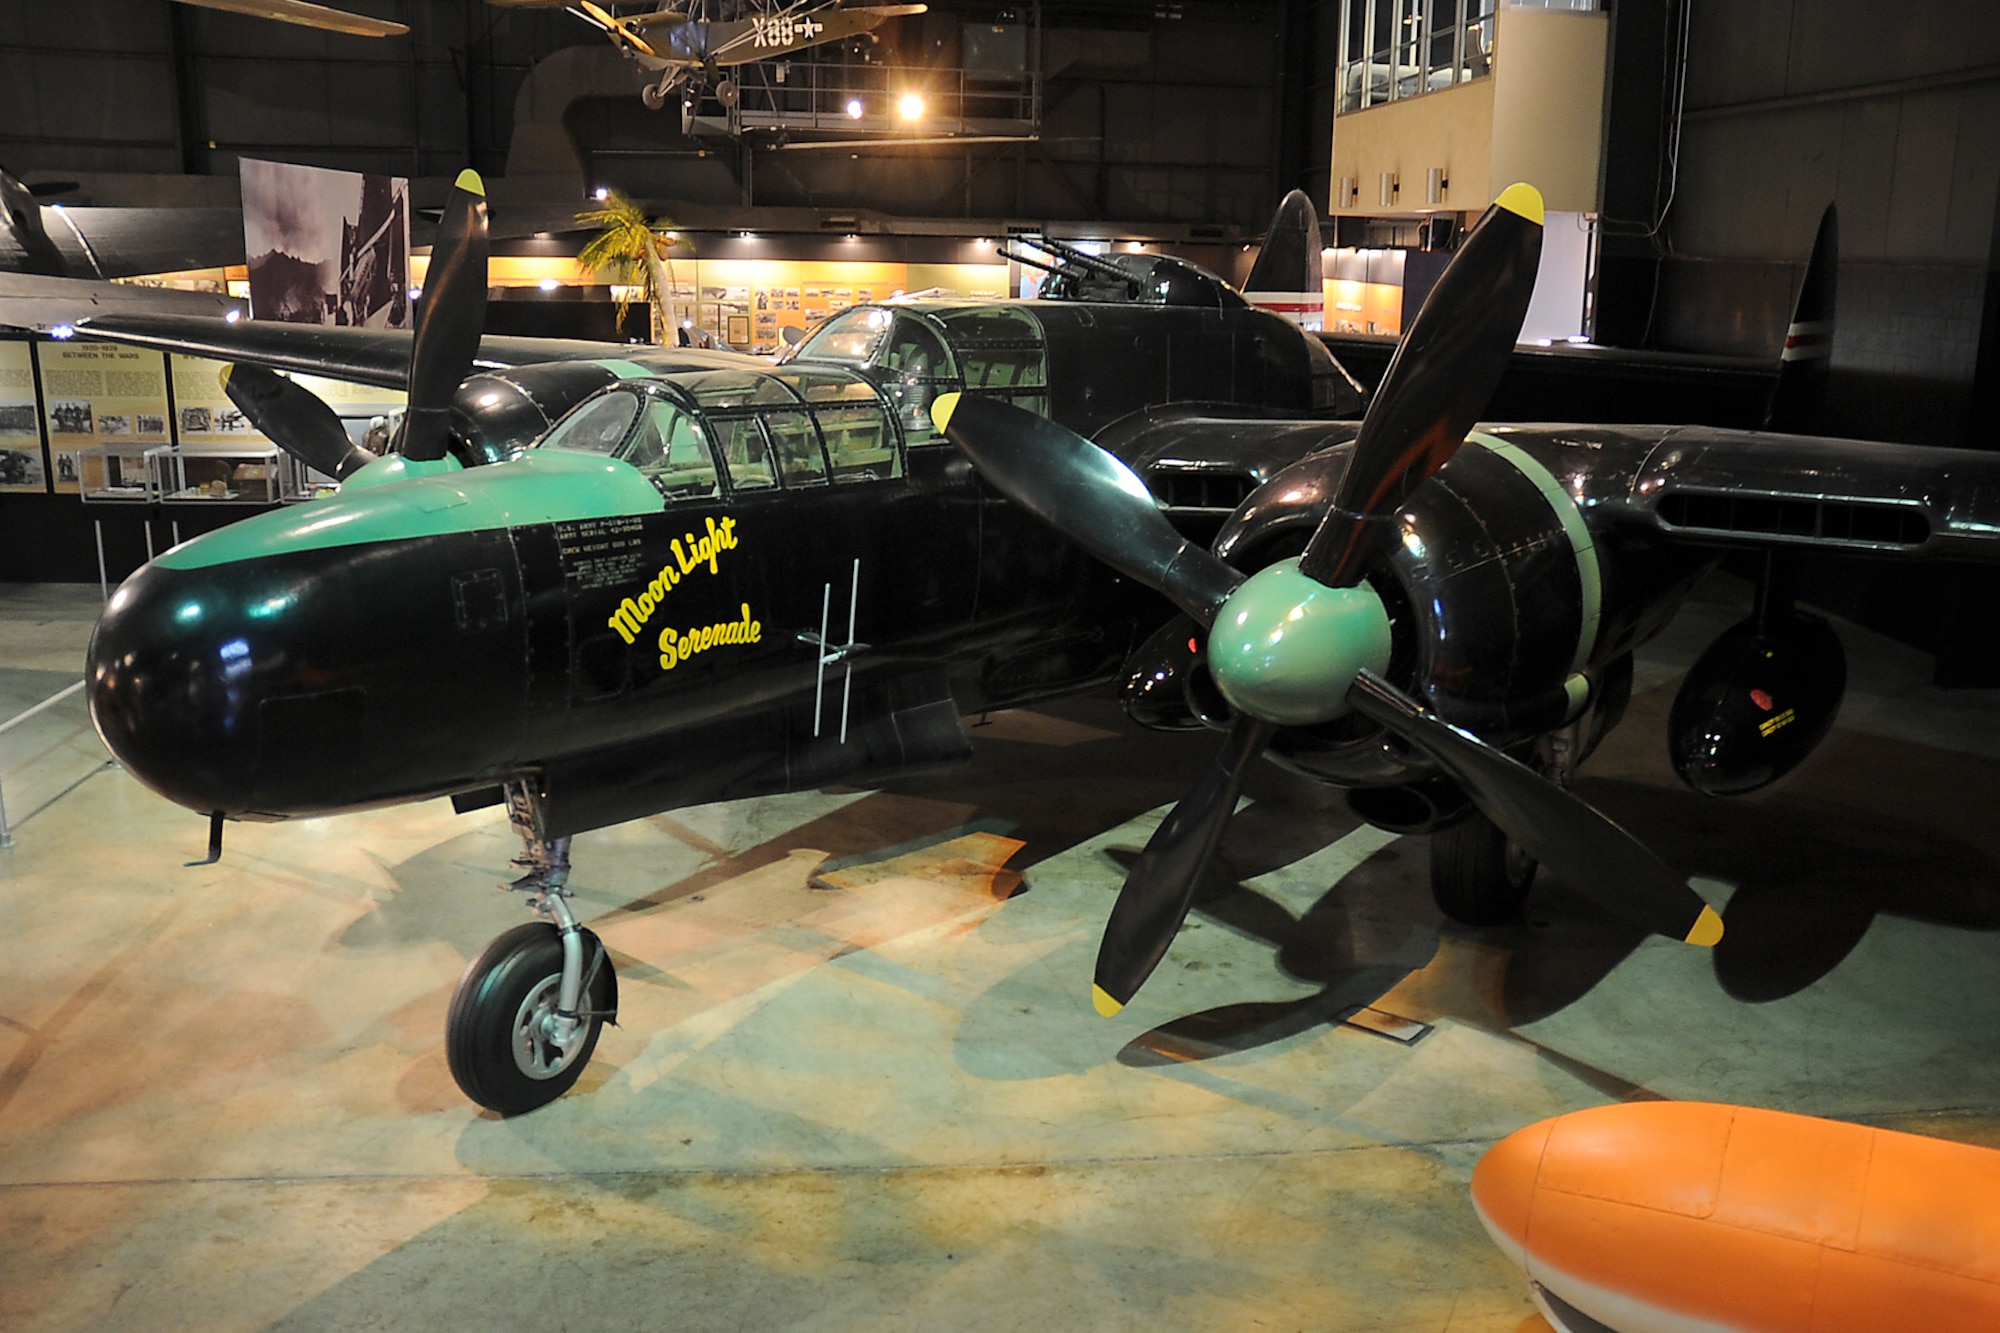 DAYTON, Ohio -- Northrop P-61C Black Widow in the World War II Gallery at the National Museum of the United States Air Force. (U.S. Air Force photo)
